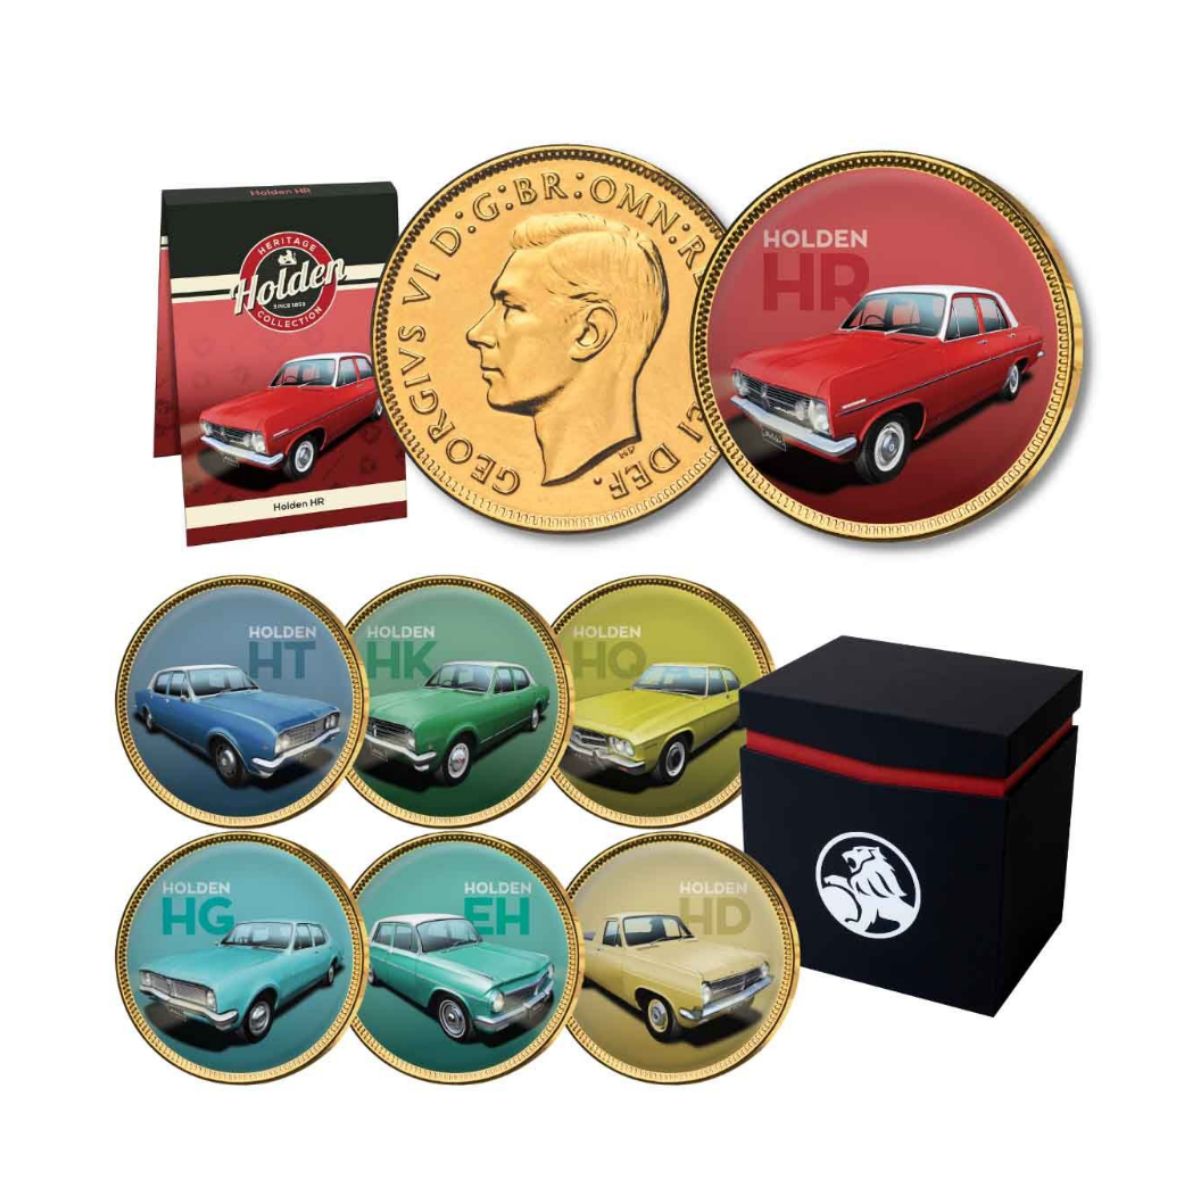 Holden Heritage Pennies Collection Vol.2